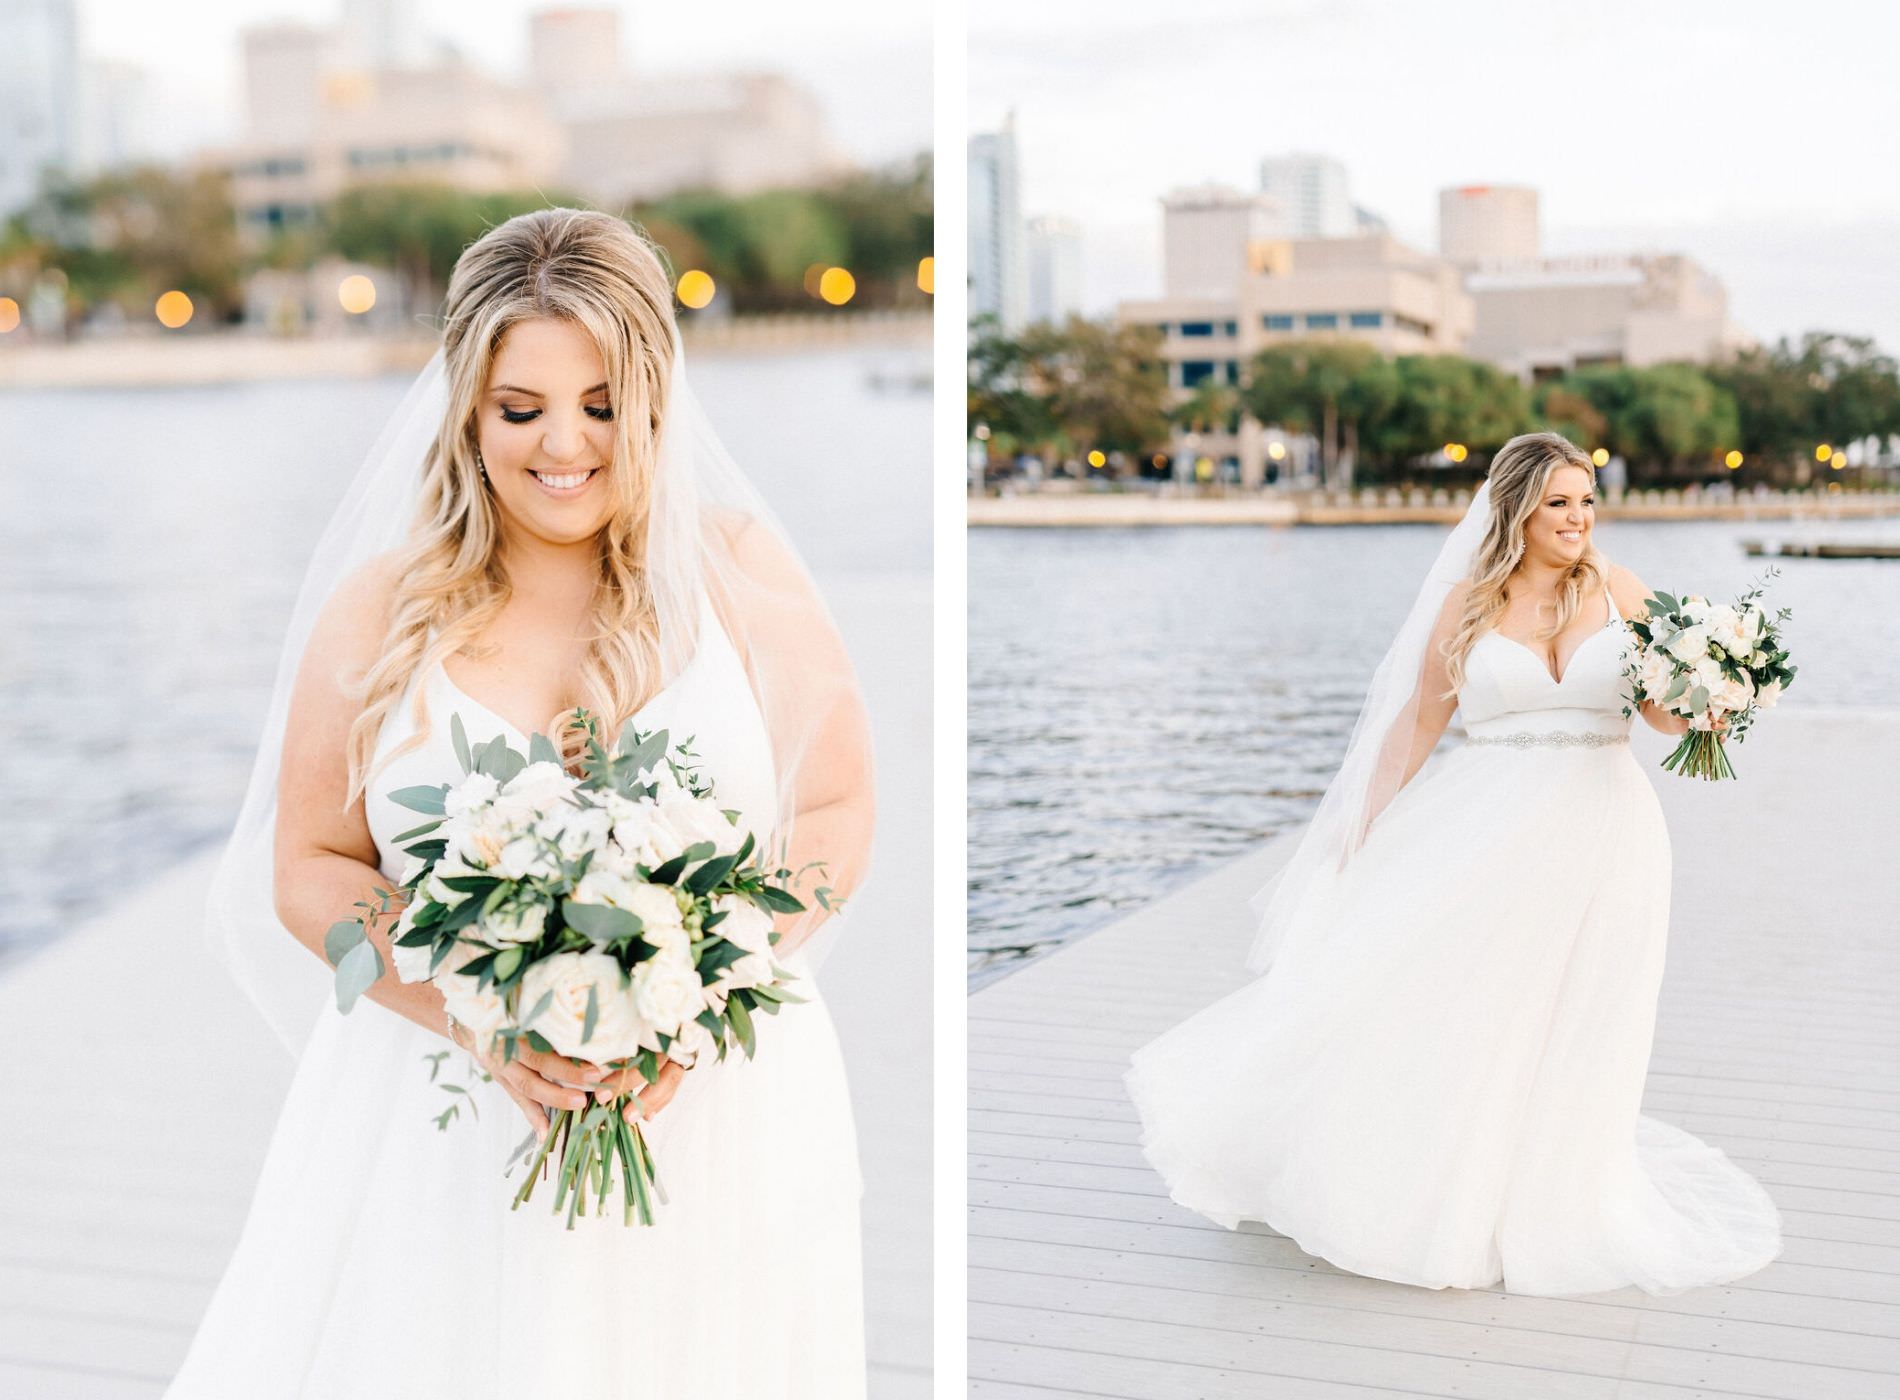 Classic Tampa Bay Bride Holding Elegant Bouquet, With White Roses, Ivory Florals and Greenery, Florida Waterfront Bridal Portrait at Tampa River Center | Florida Wedding Planner UNIQUE Weddings and Events